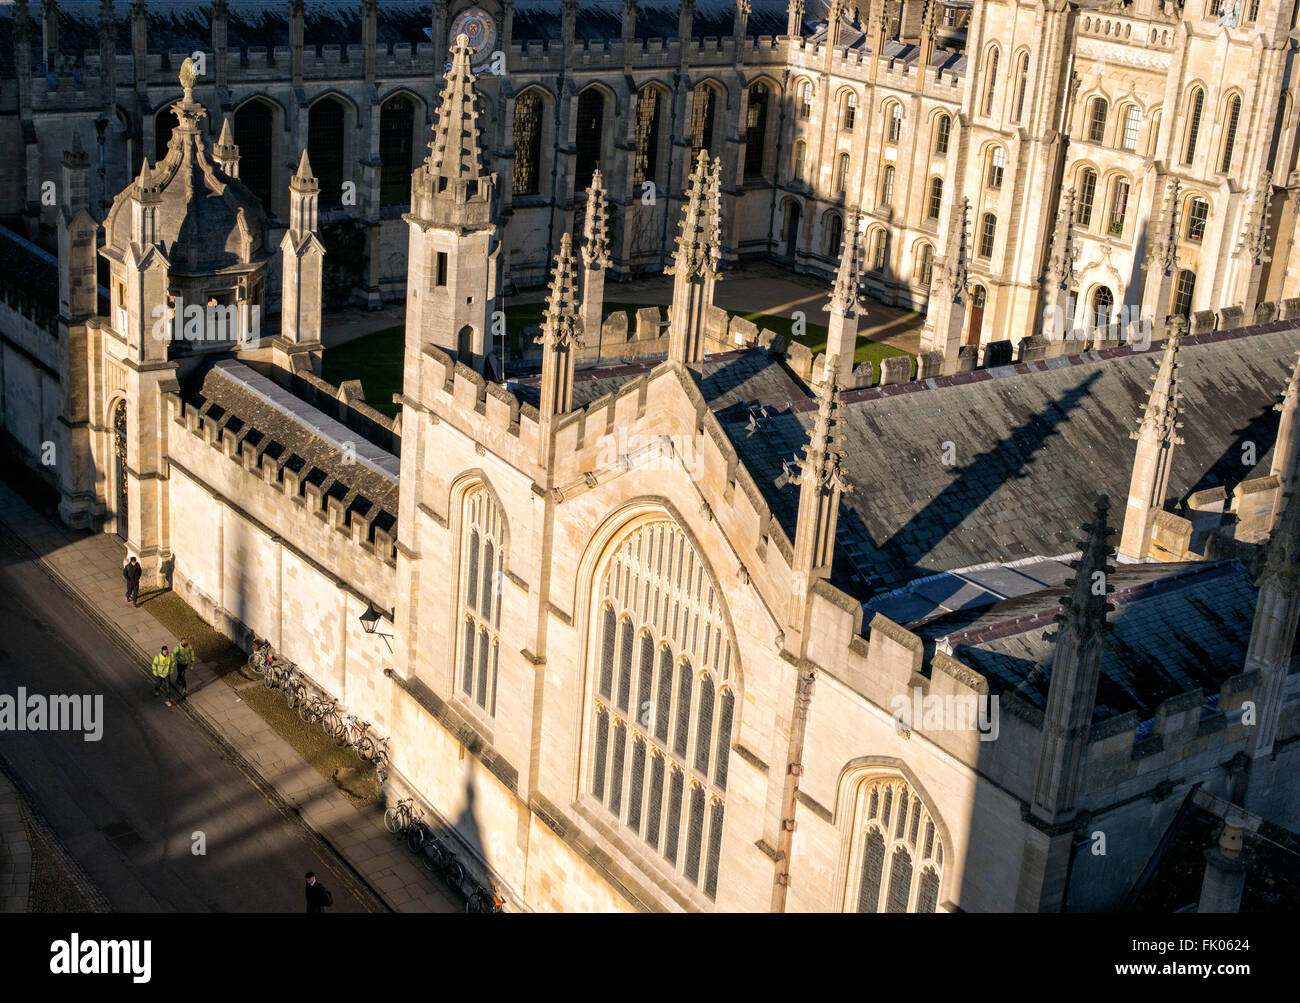 All Souls College. Oxford University, England Stock Photo